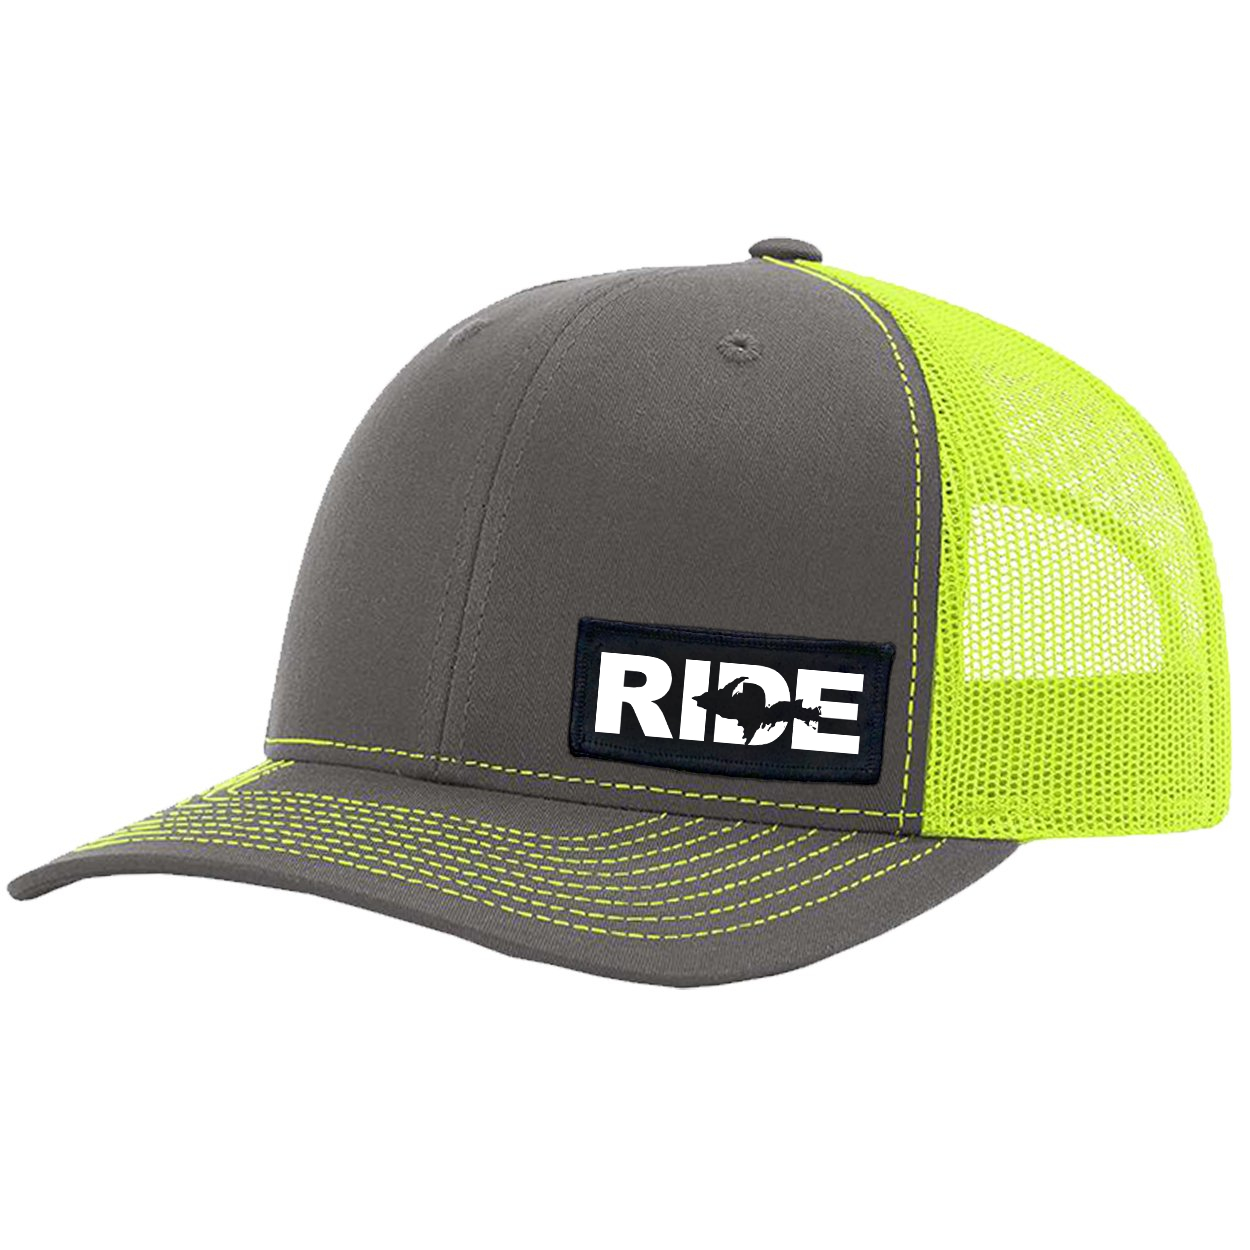 Ride Michigan UP Night Out Woven Patch Snapback Trucker Hat Charcoal/Neon Yellow (White Logo)